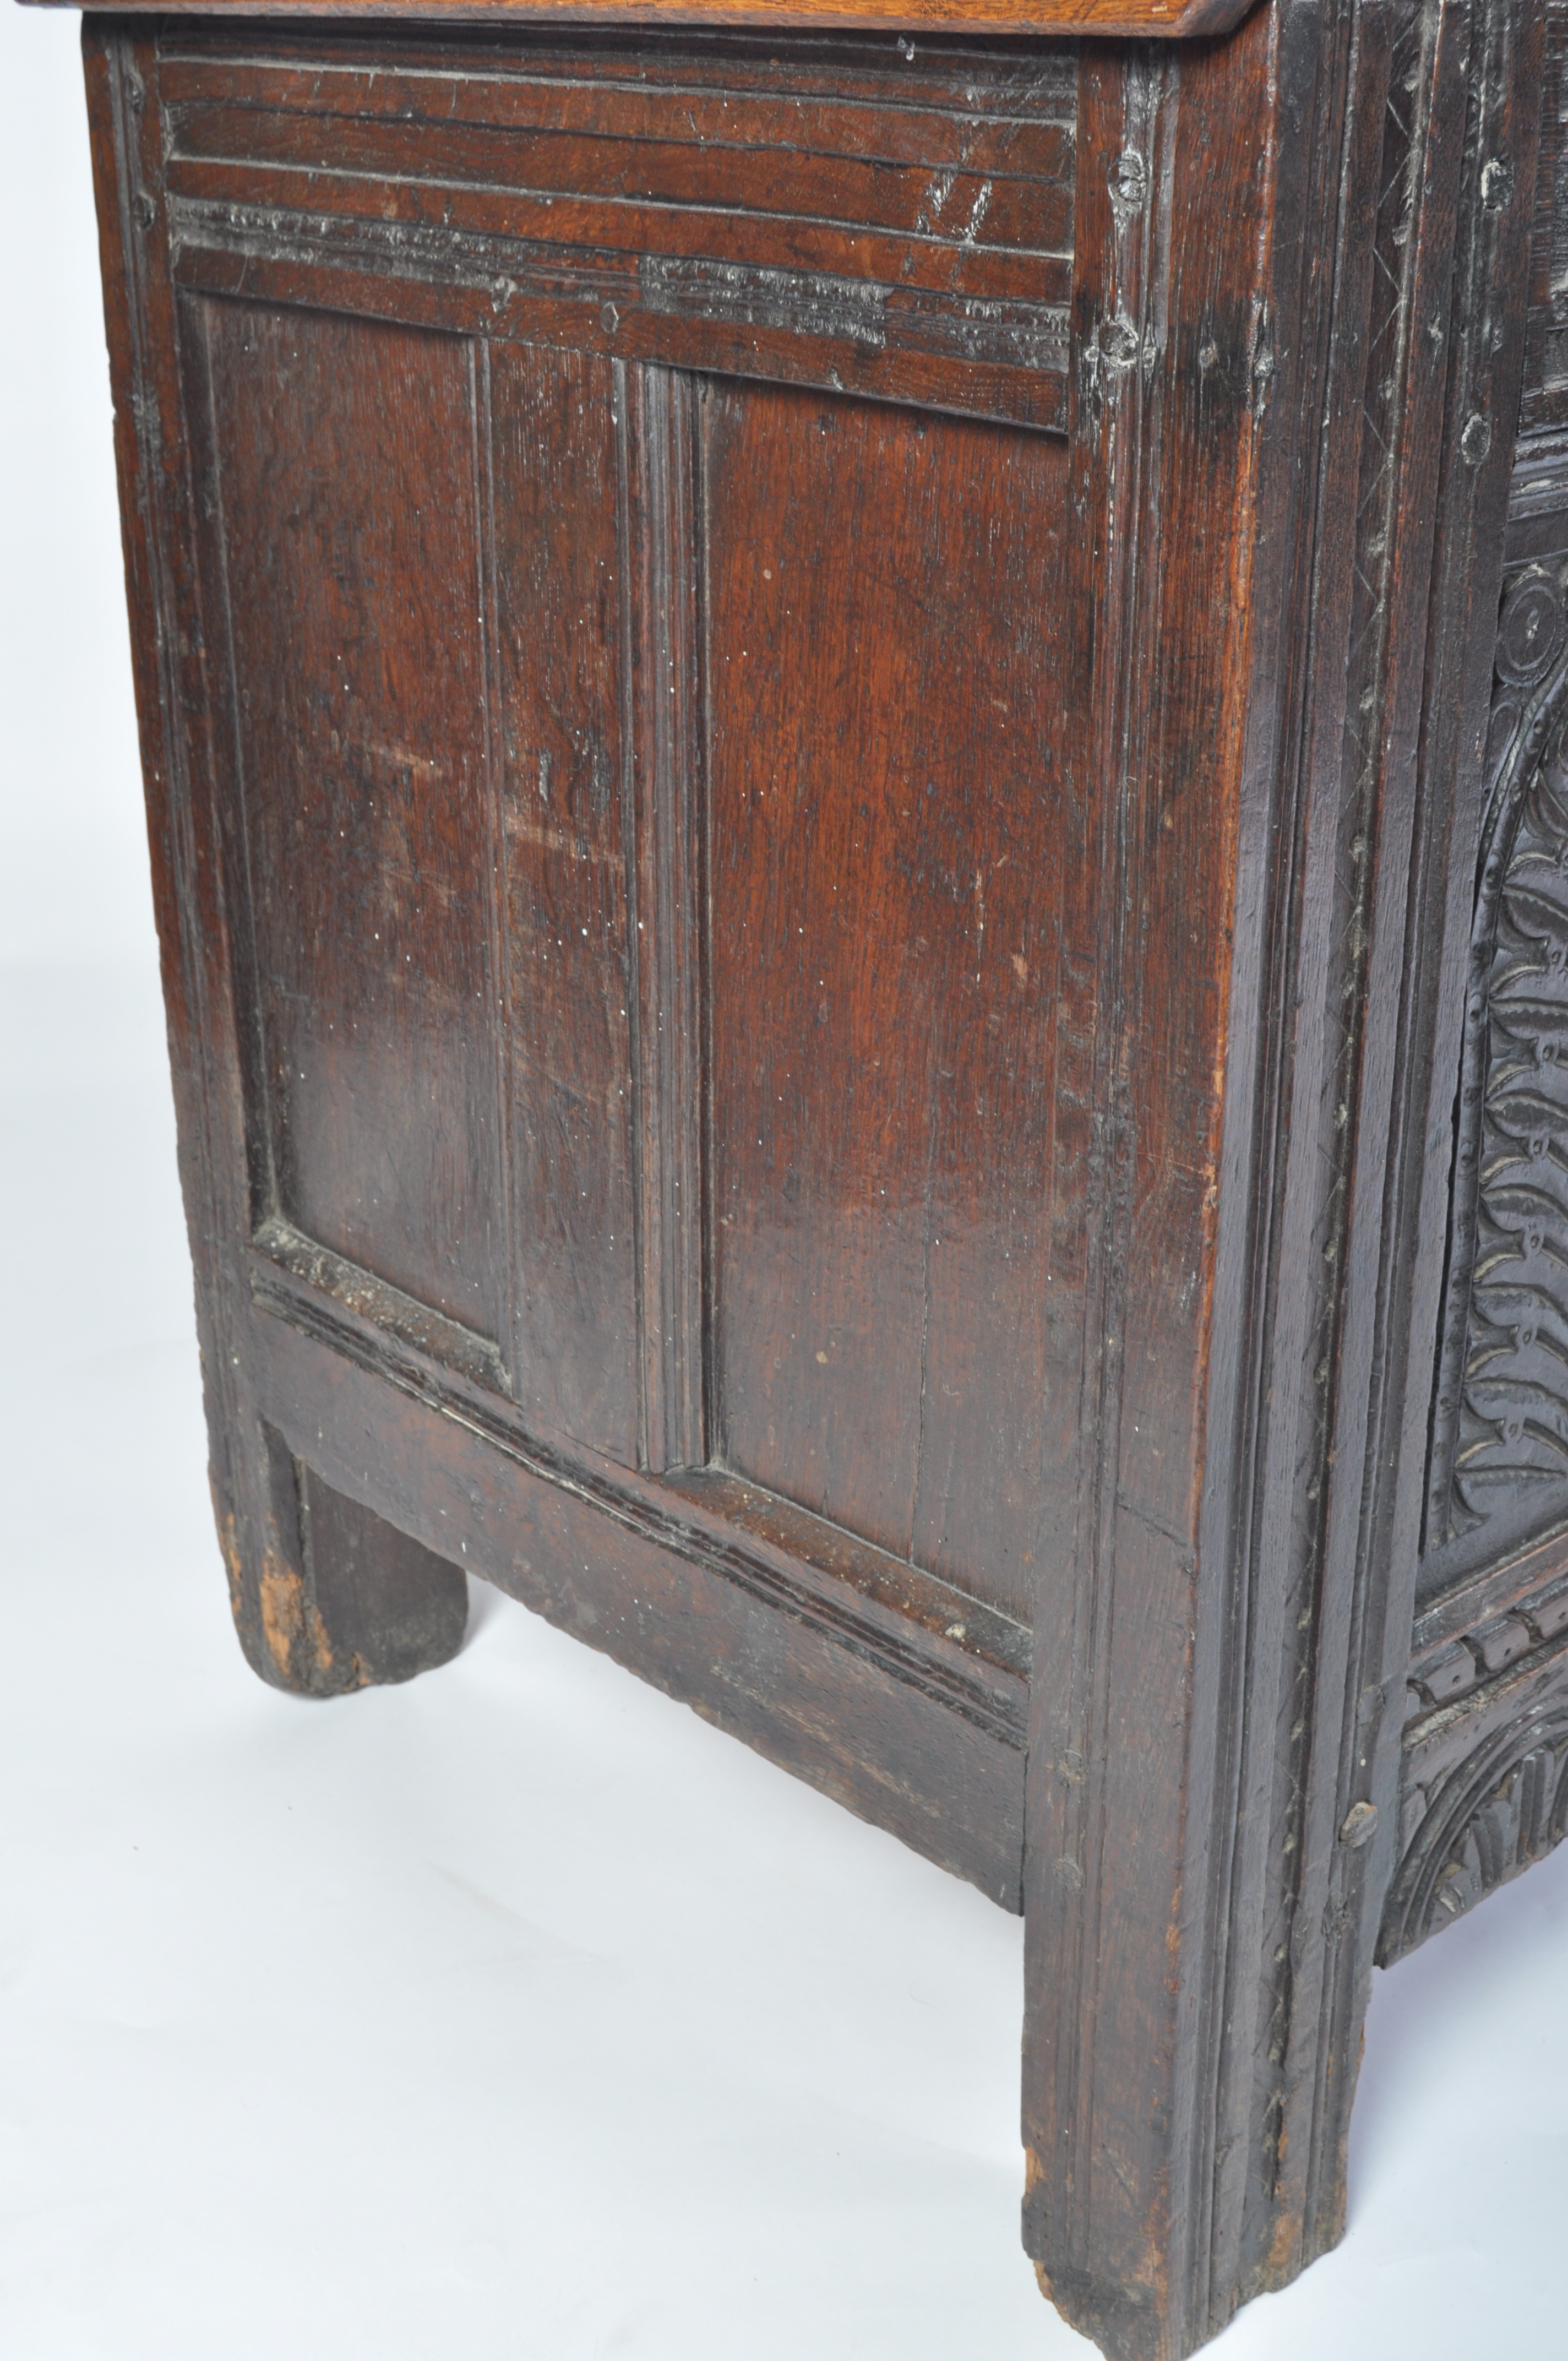 A 17TH CENTURY GLOUCESTERSHIRE WEST COUNTRY COFFER CHEST - Image 4 of 6